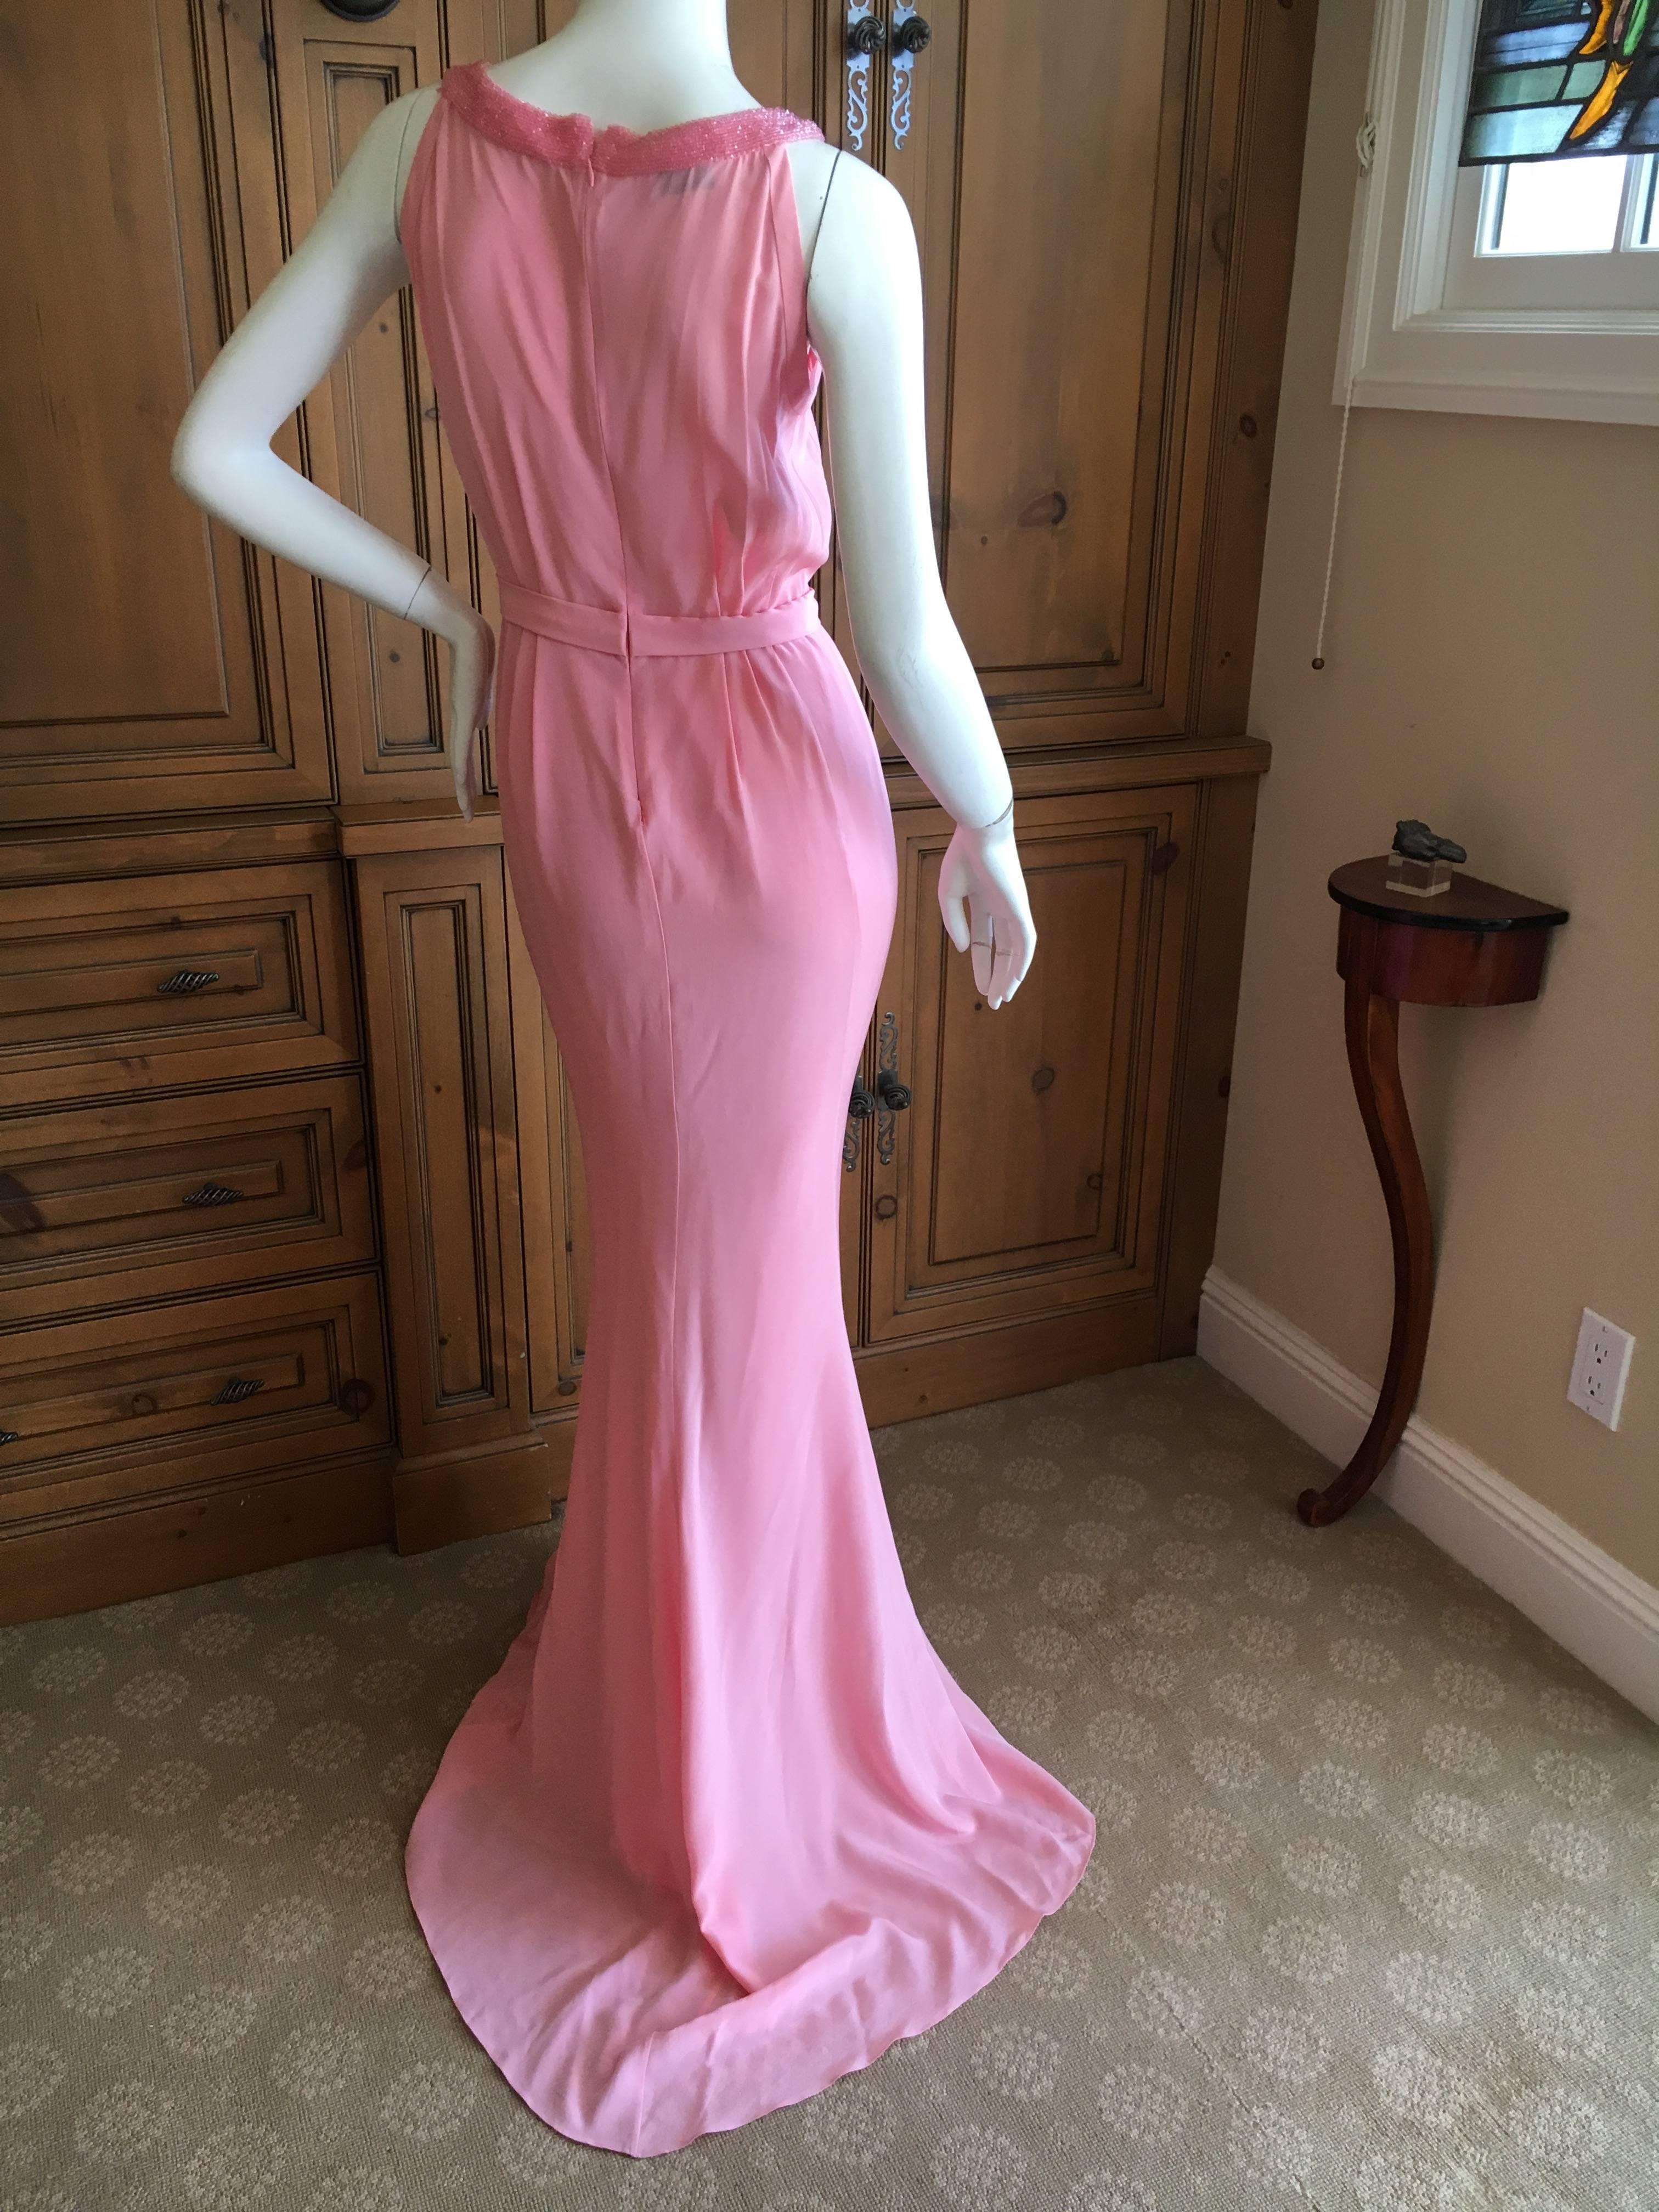 Moschino Pink Beaded Evening Dress with Keyhole Accents For Sale 1